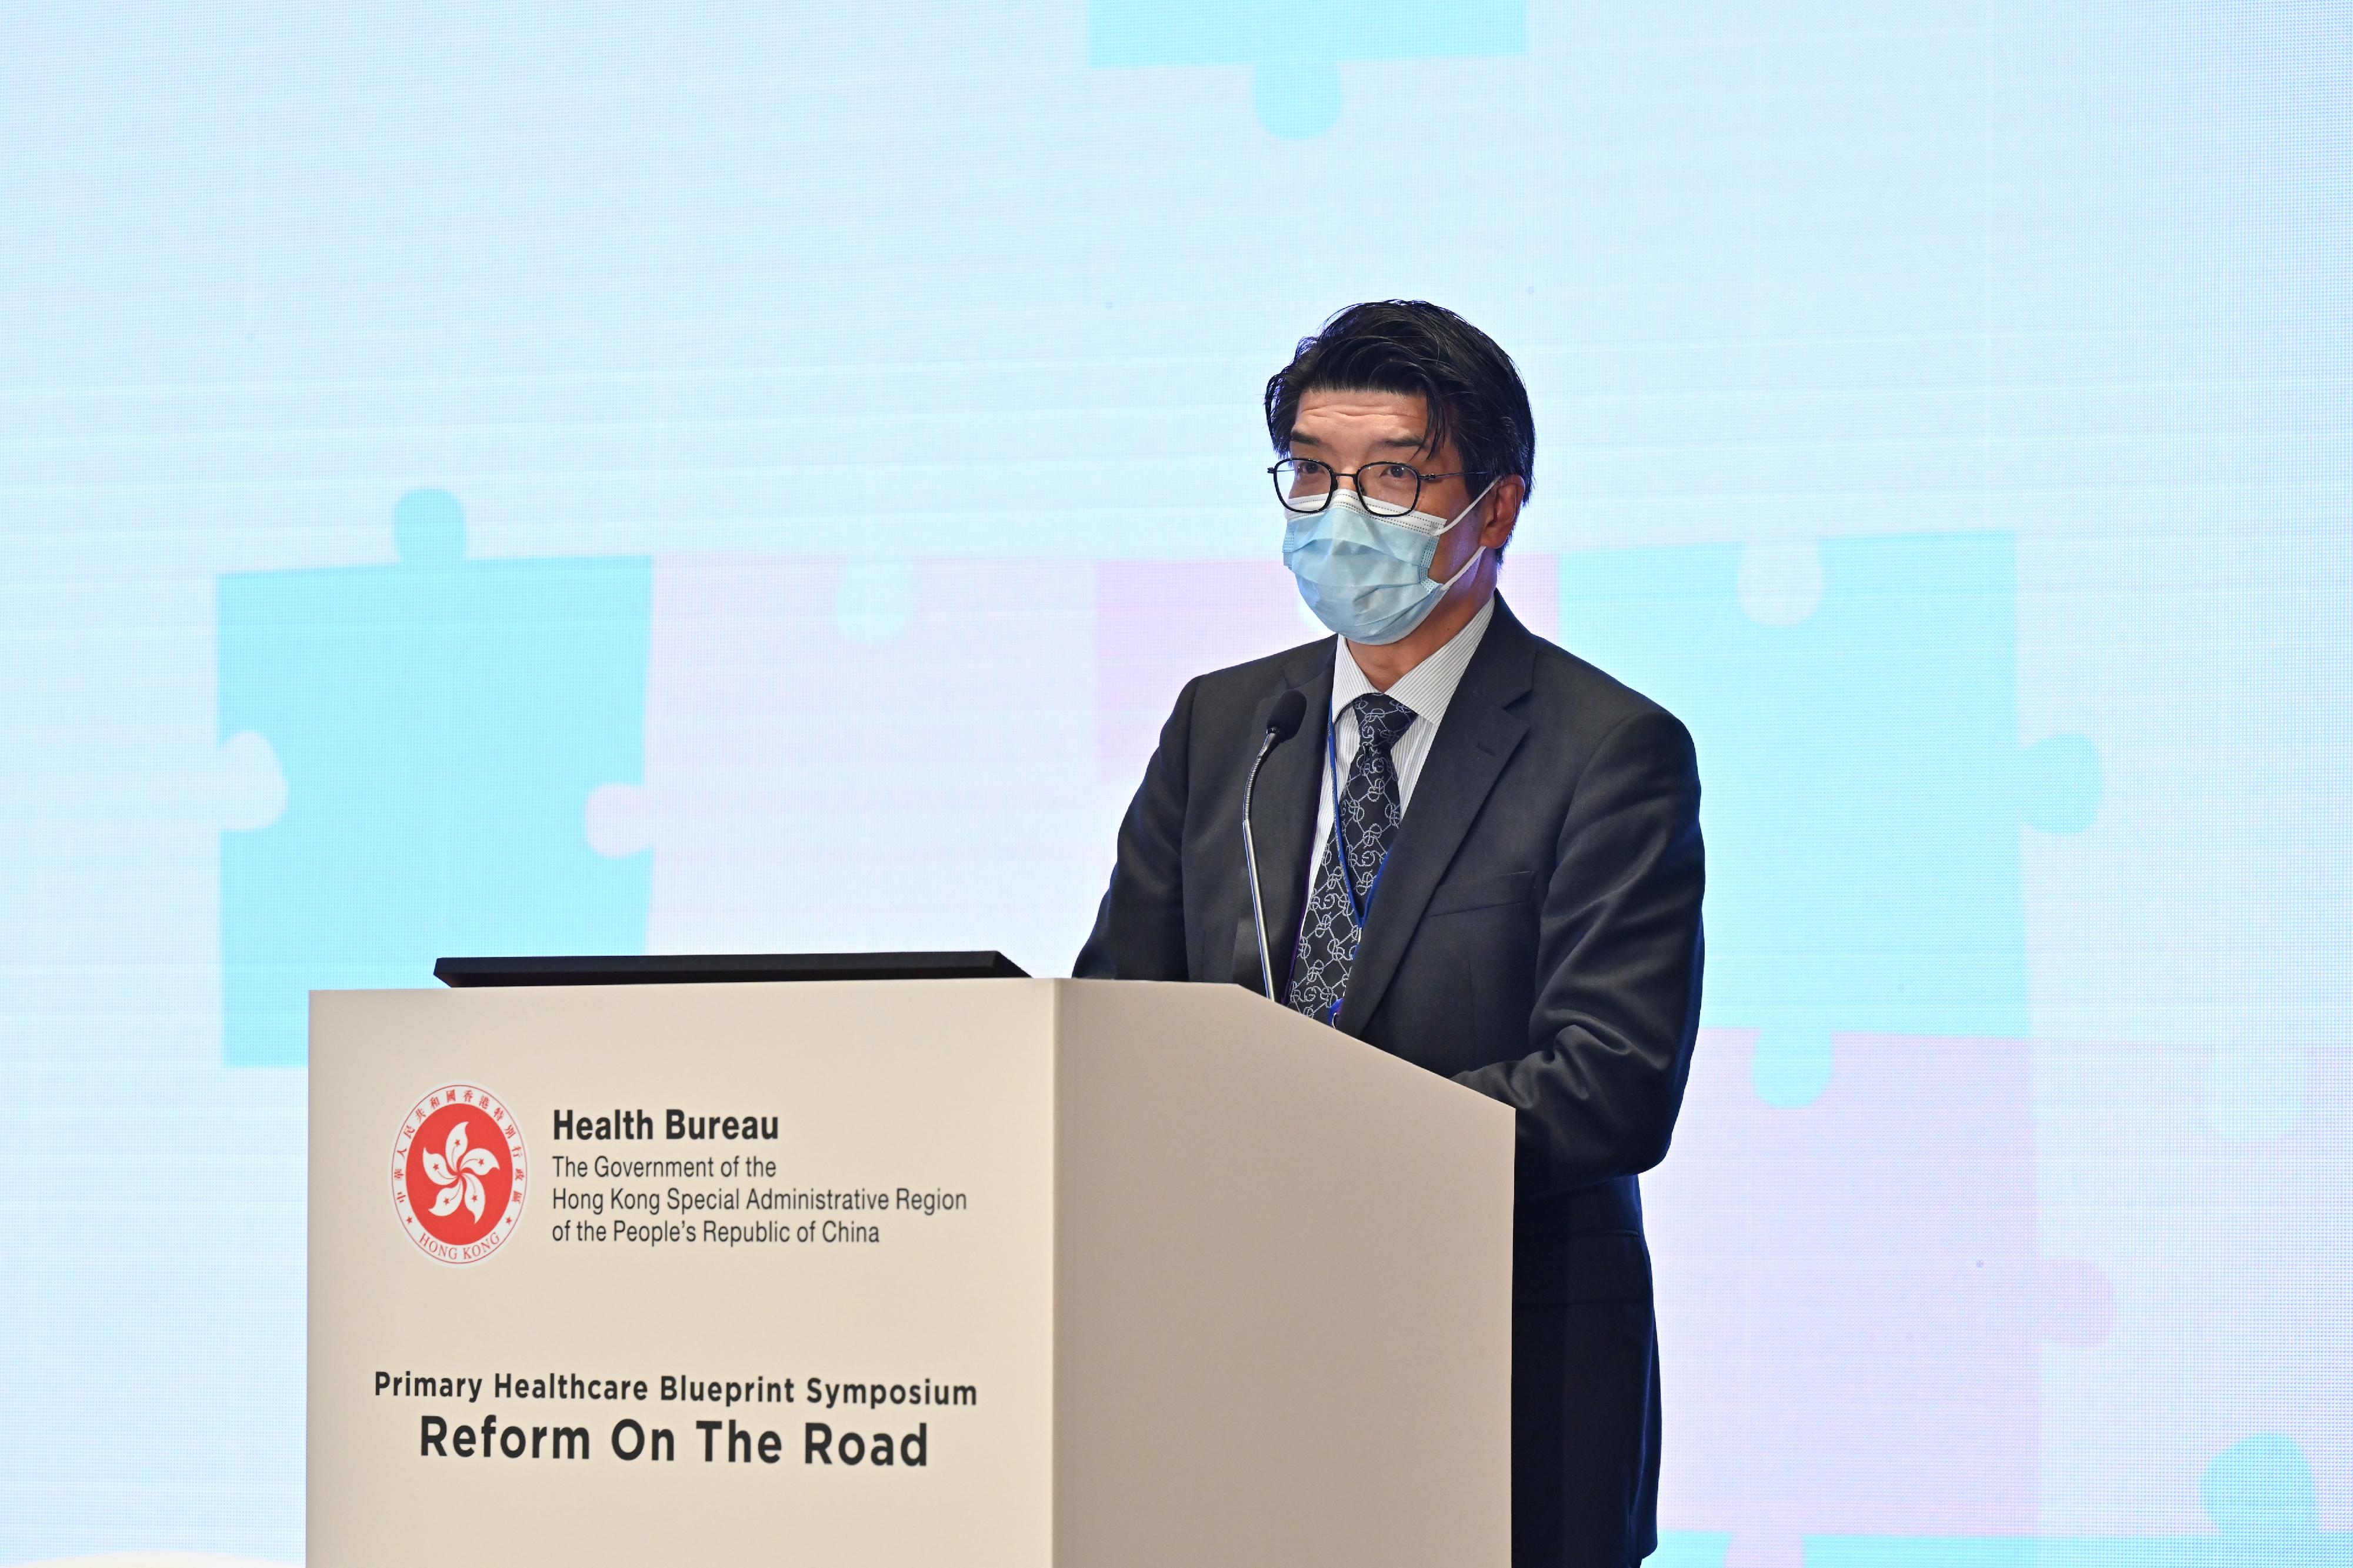 The Commissioner for Primary Healthcare, Dr Pang Fei-chau, calls for closer collaboration from the community towards broader implementation of the Primary Healthcare Blueprint when he rounds up for the Primary Healthcare Blueprint Symposium today (January 15).